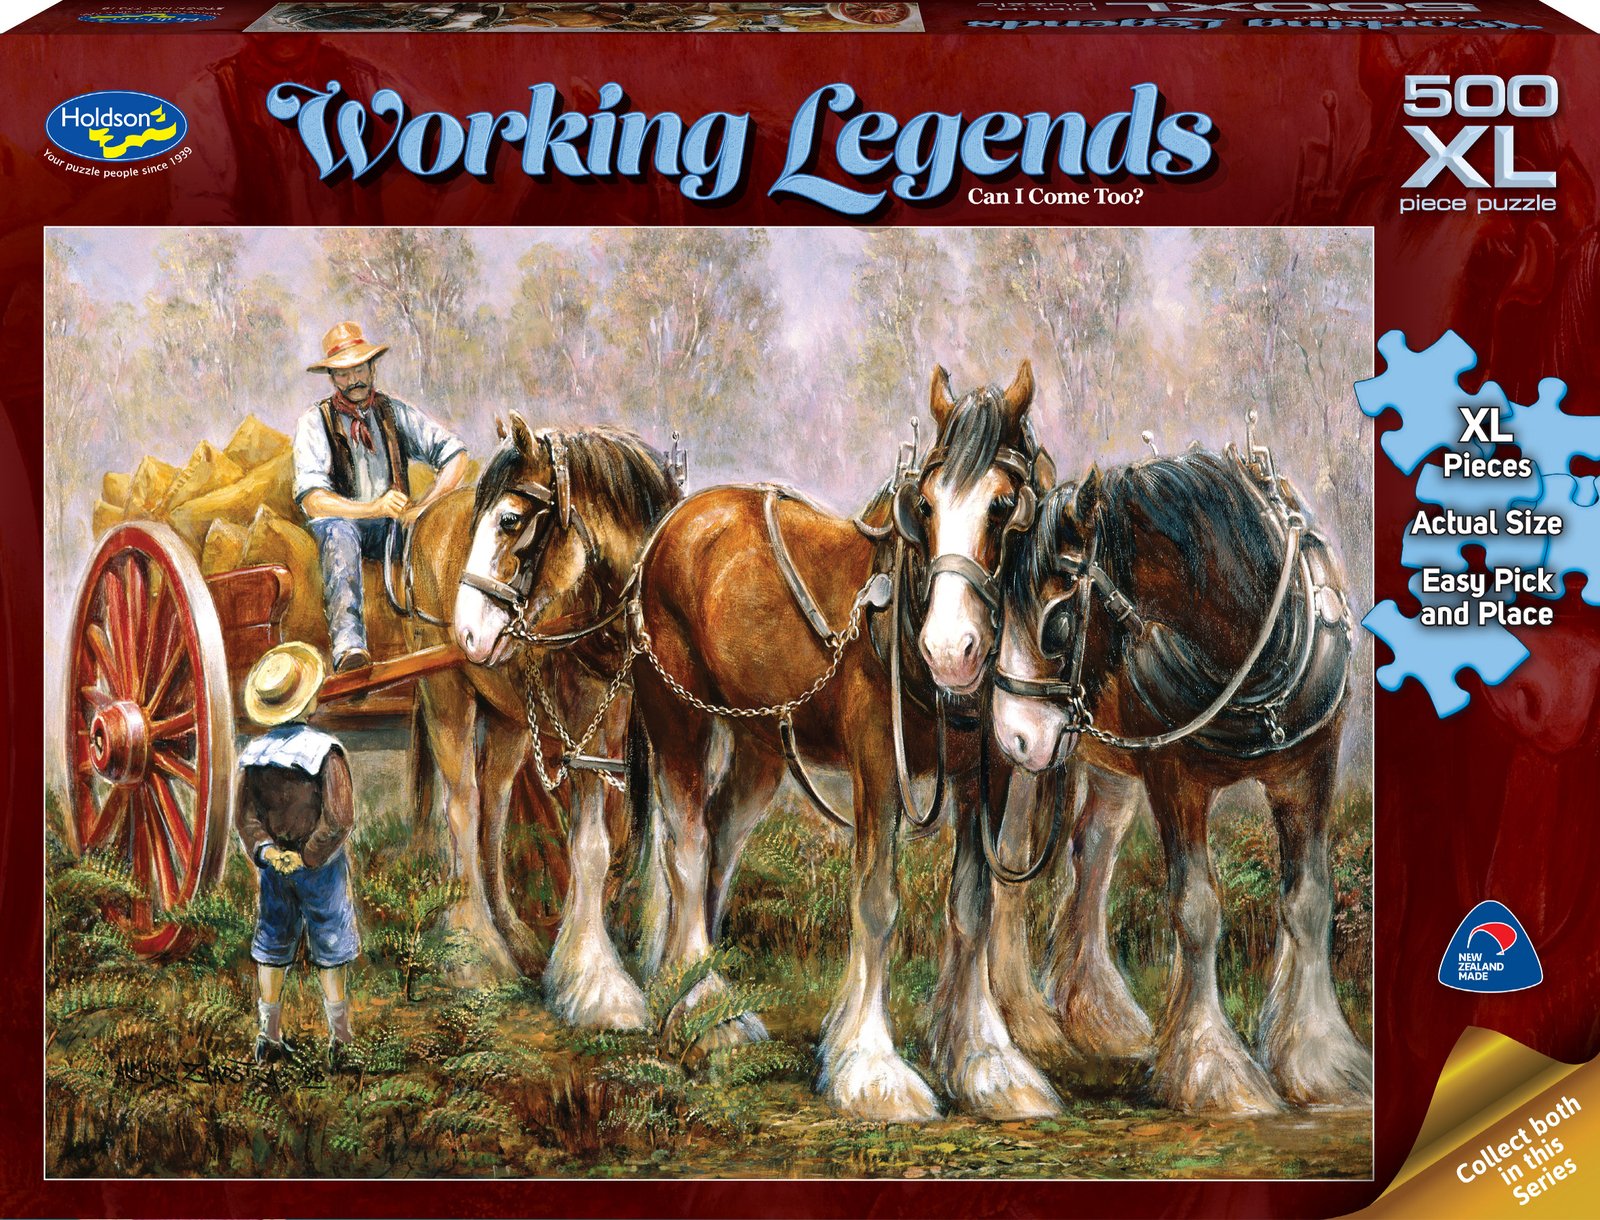 Working Legends: Can I Come Too? 500XLpc HOLDSONS